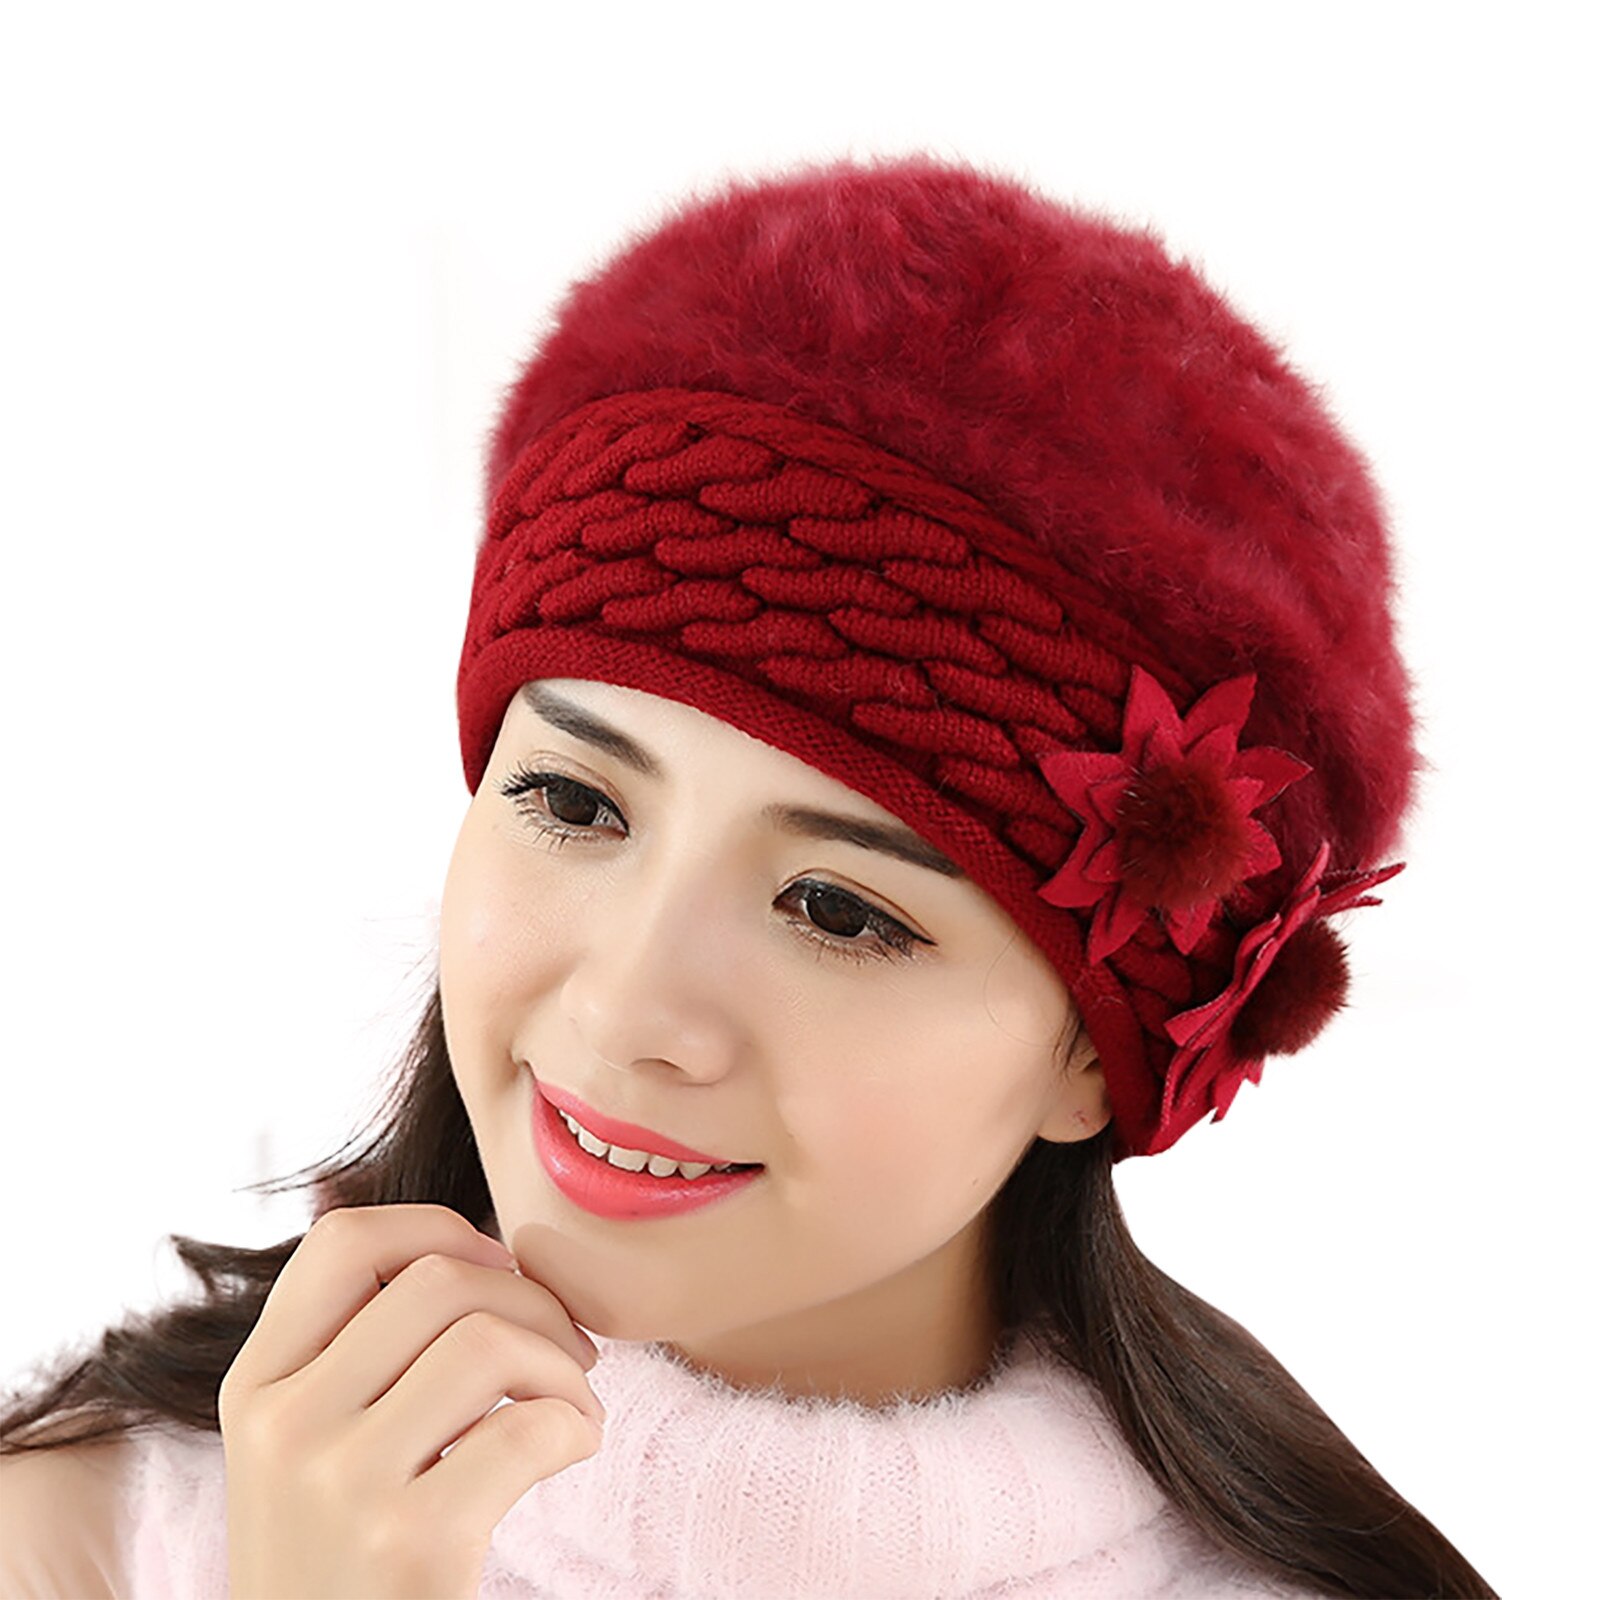 Beret Women Winter Hat Beanie Warm Knit Flower Double Layers Soft Thick Thermal Snow Skiing Outdoor Hats For Female Caps: Wine 